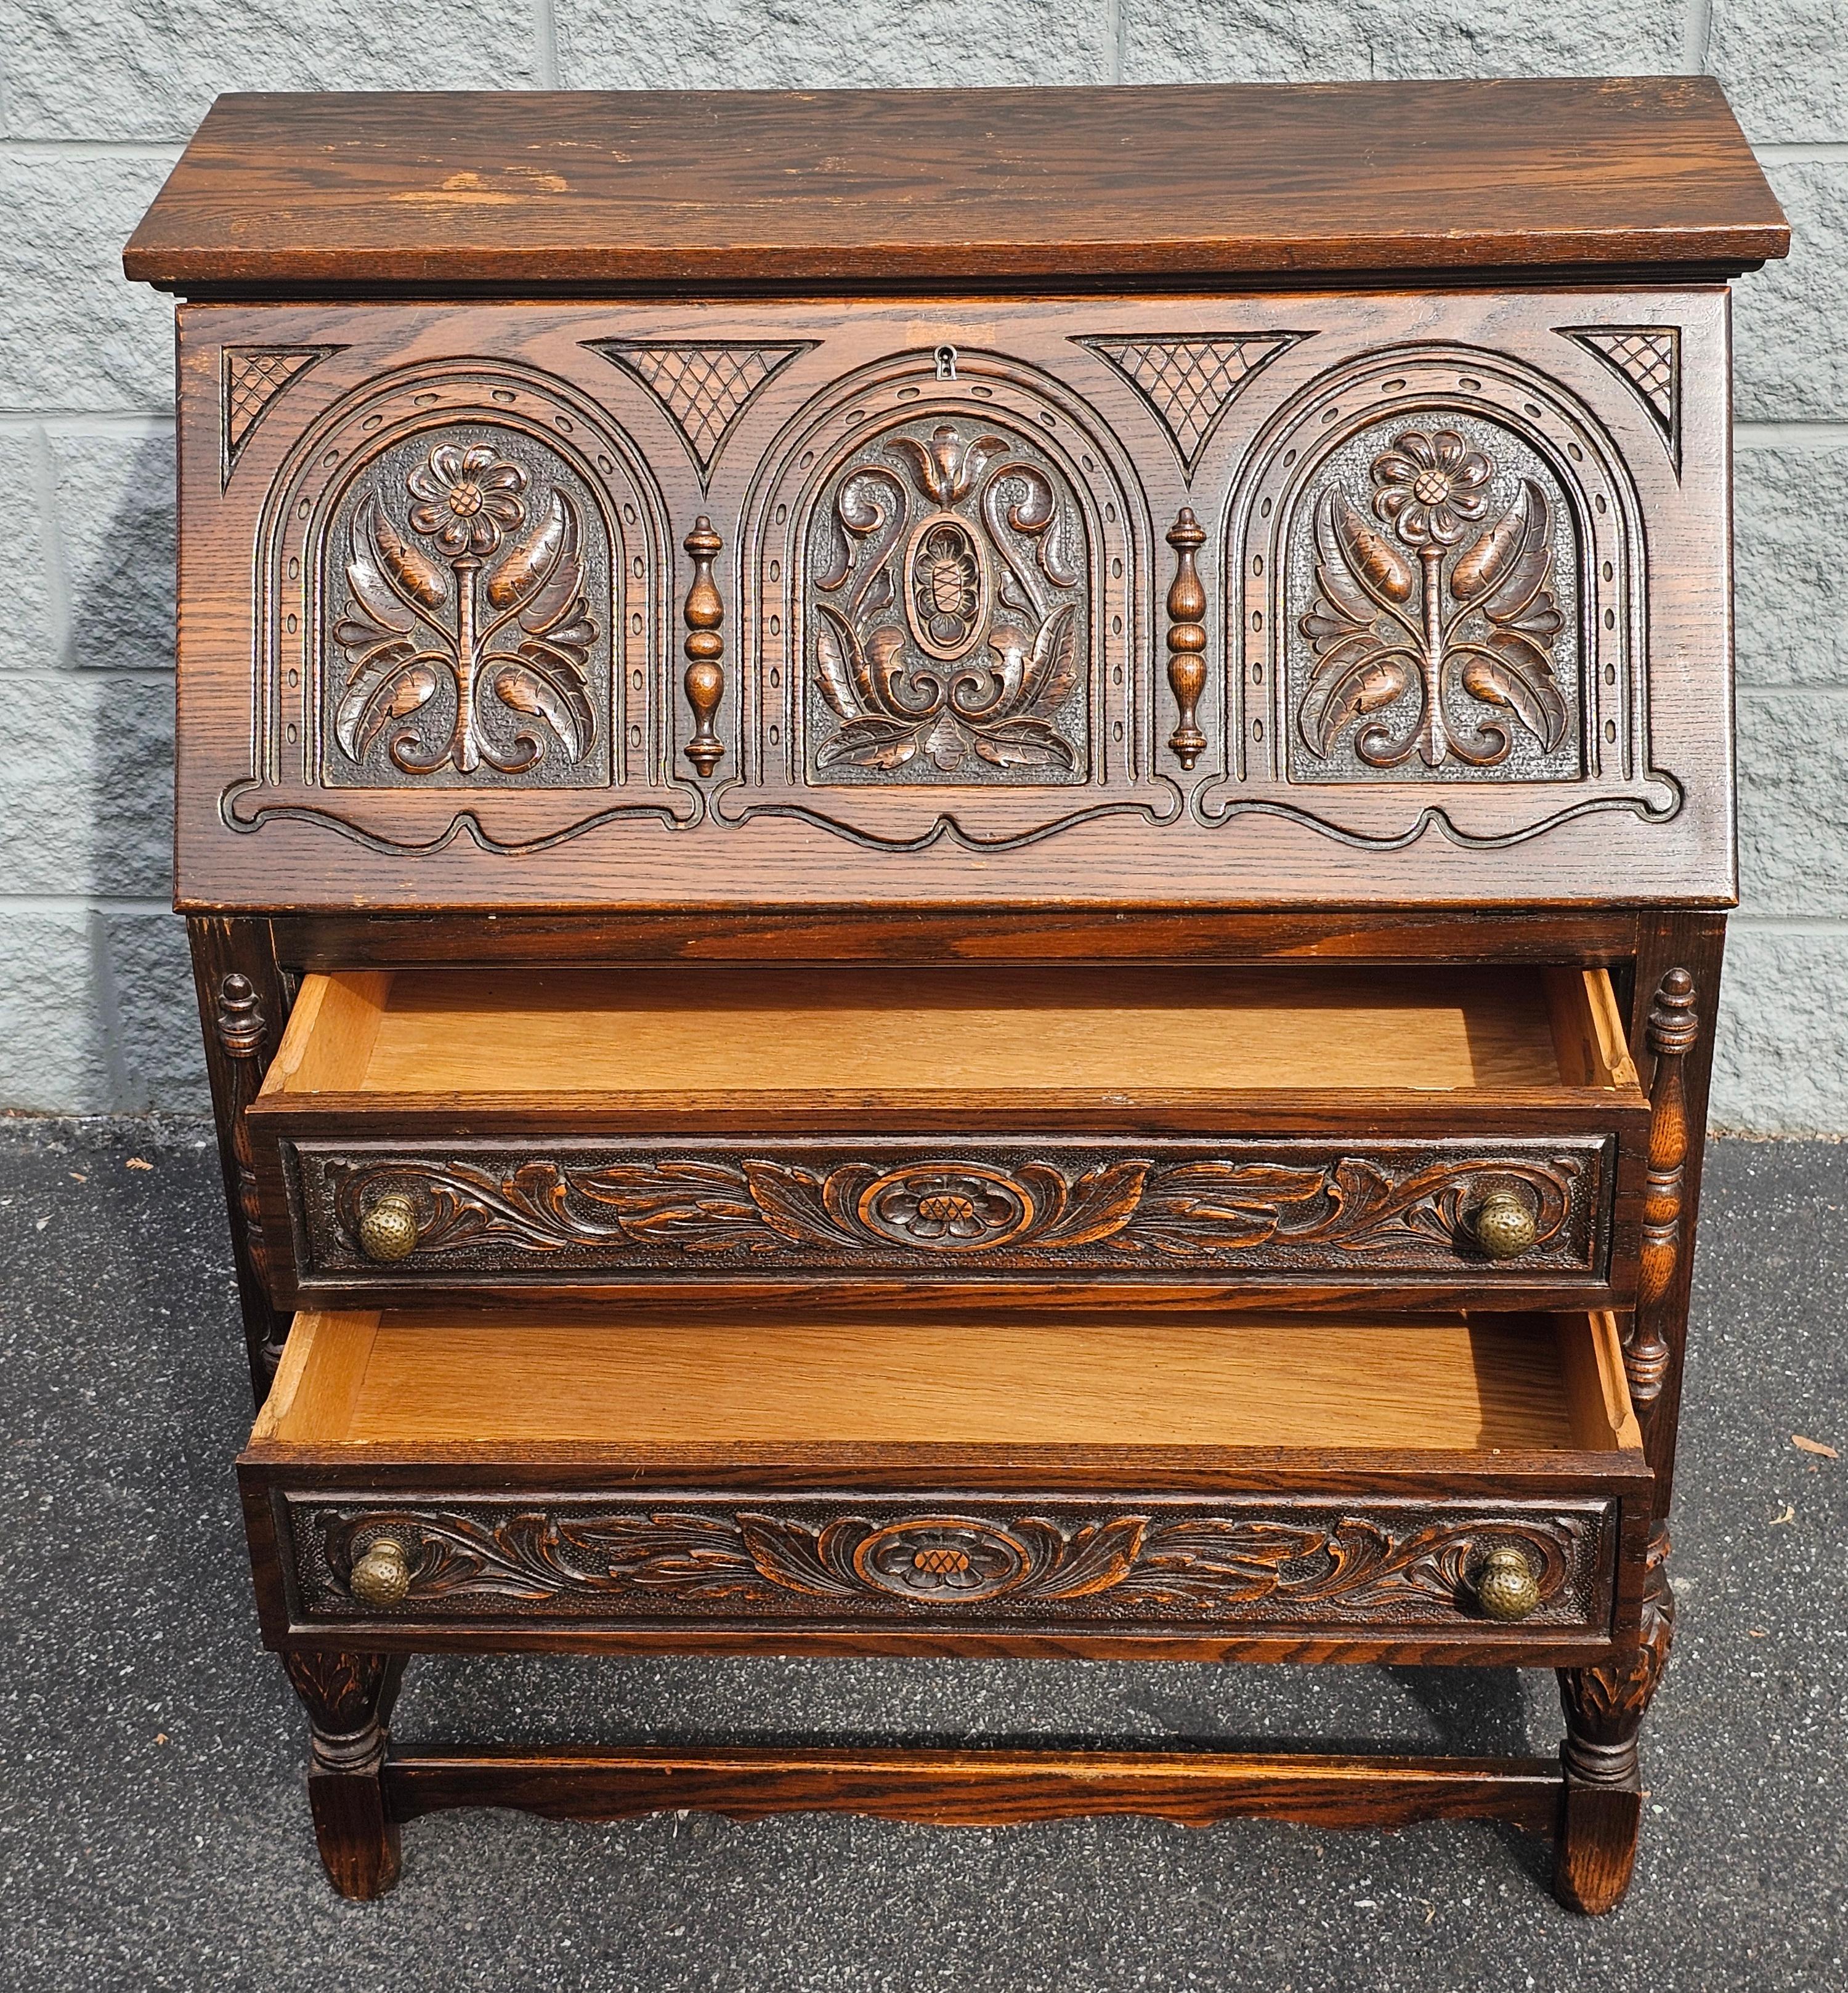 Hand-Carved 1930s Rockford Furniture Jacobean Style Handcrafted Secretary Desk For Sale